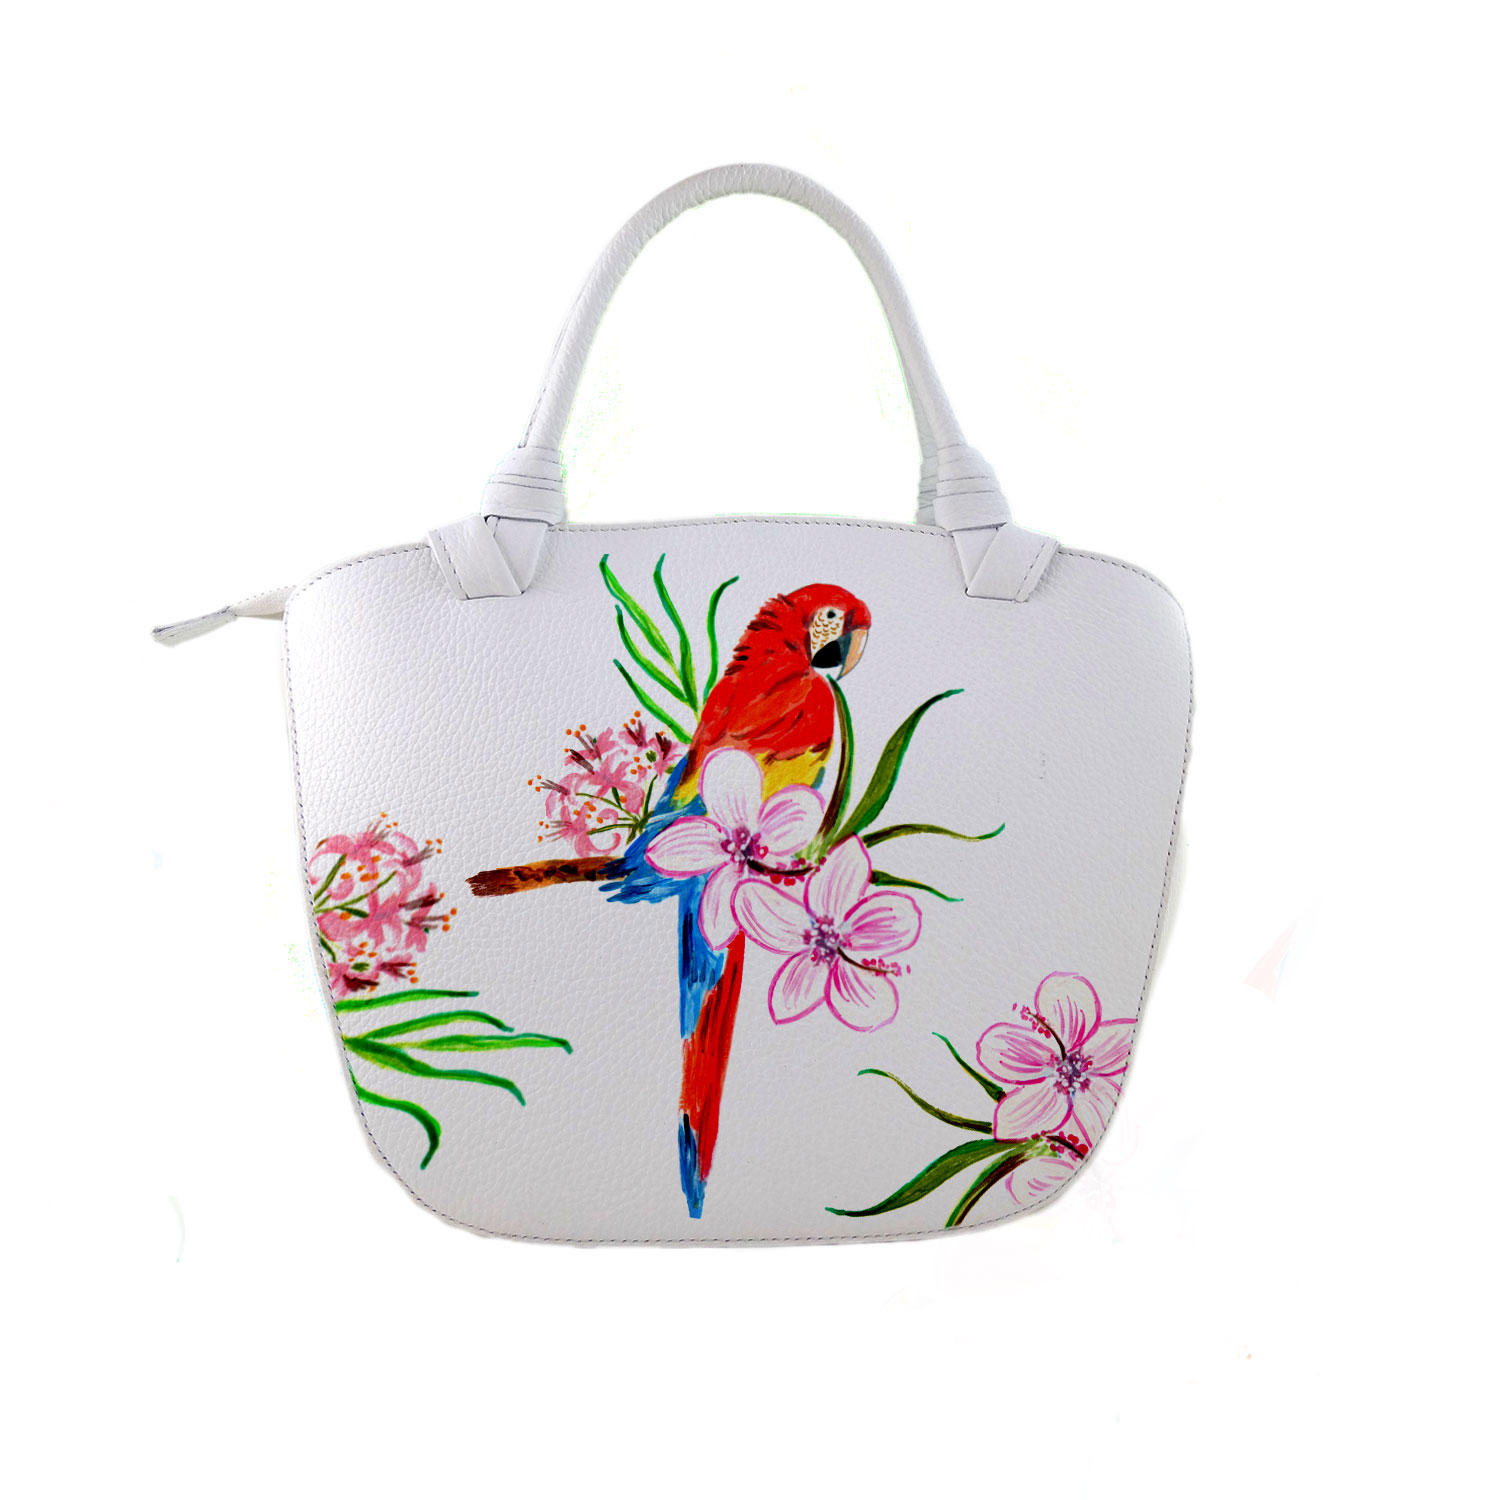 Hand painted bag - Red parrot